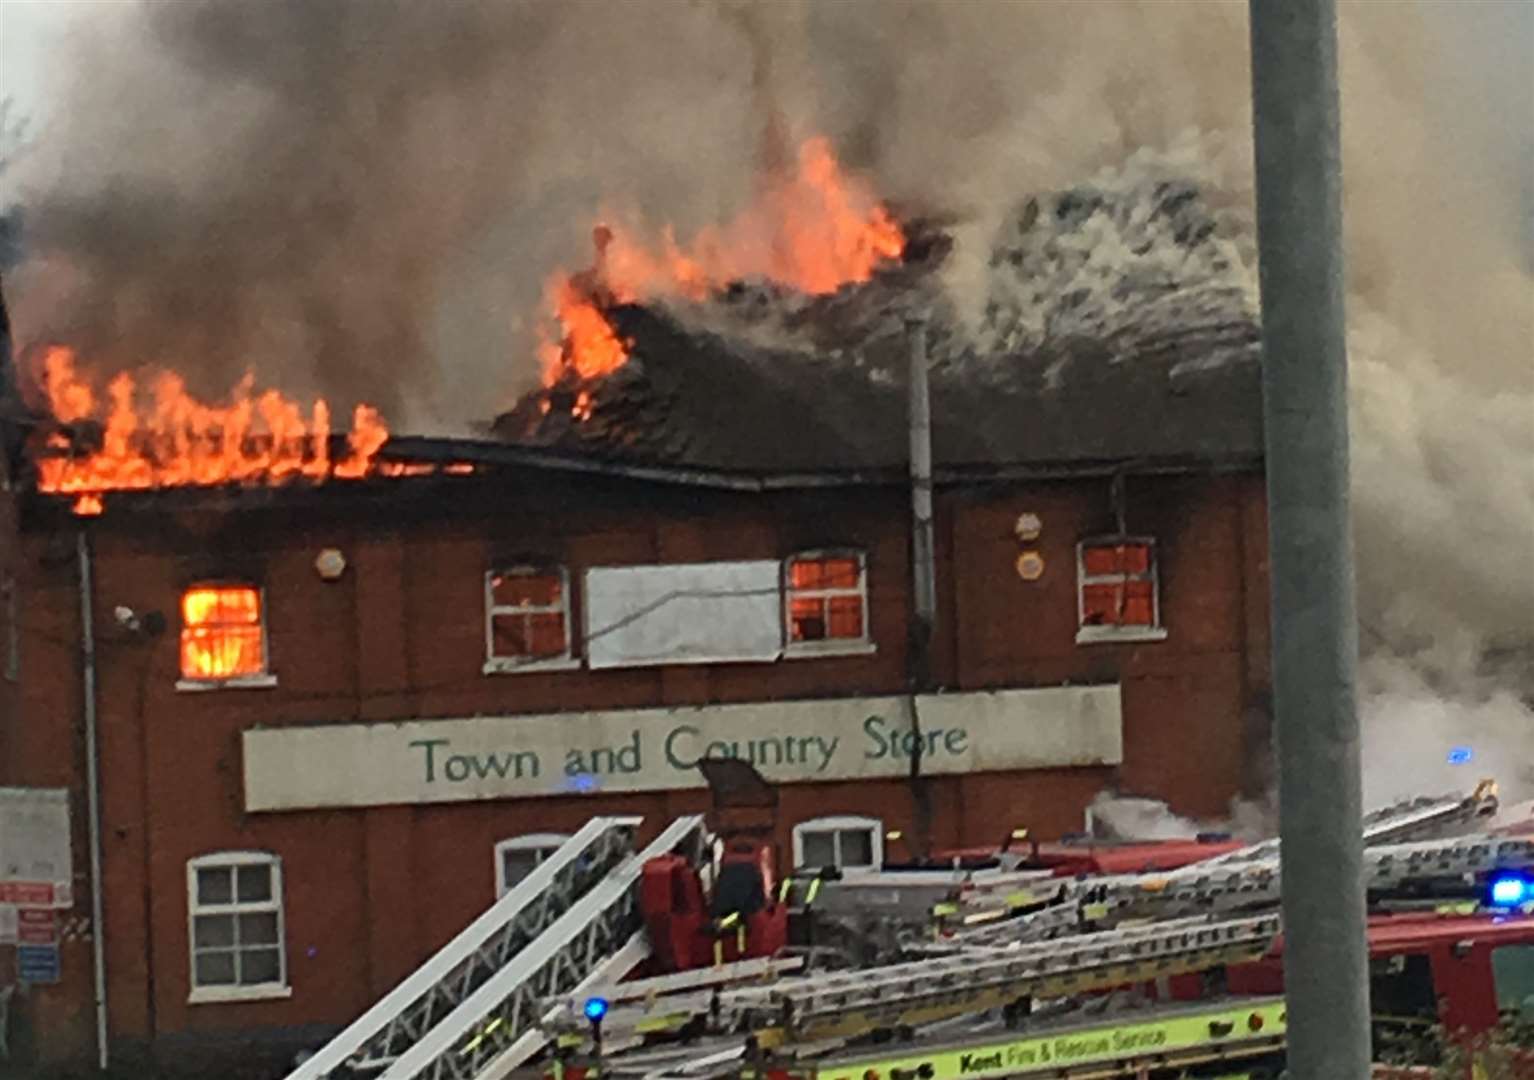 A fire tore through one of the buildings on the site last year